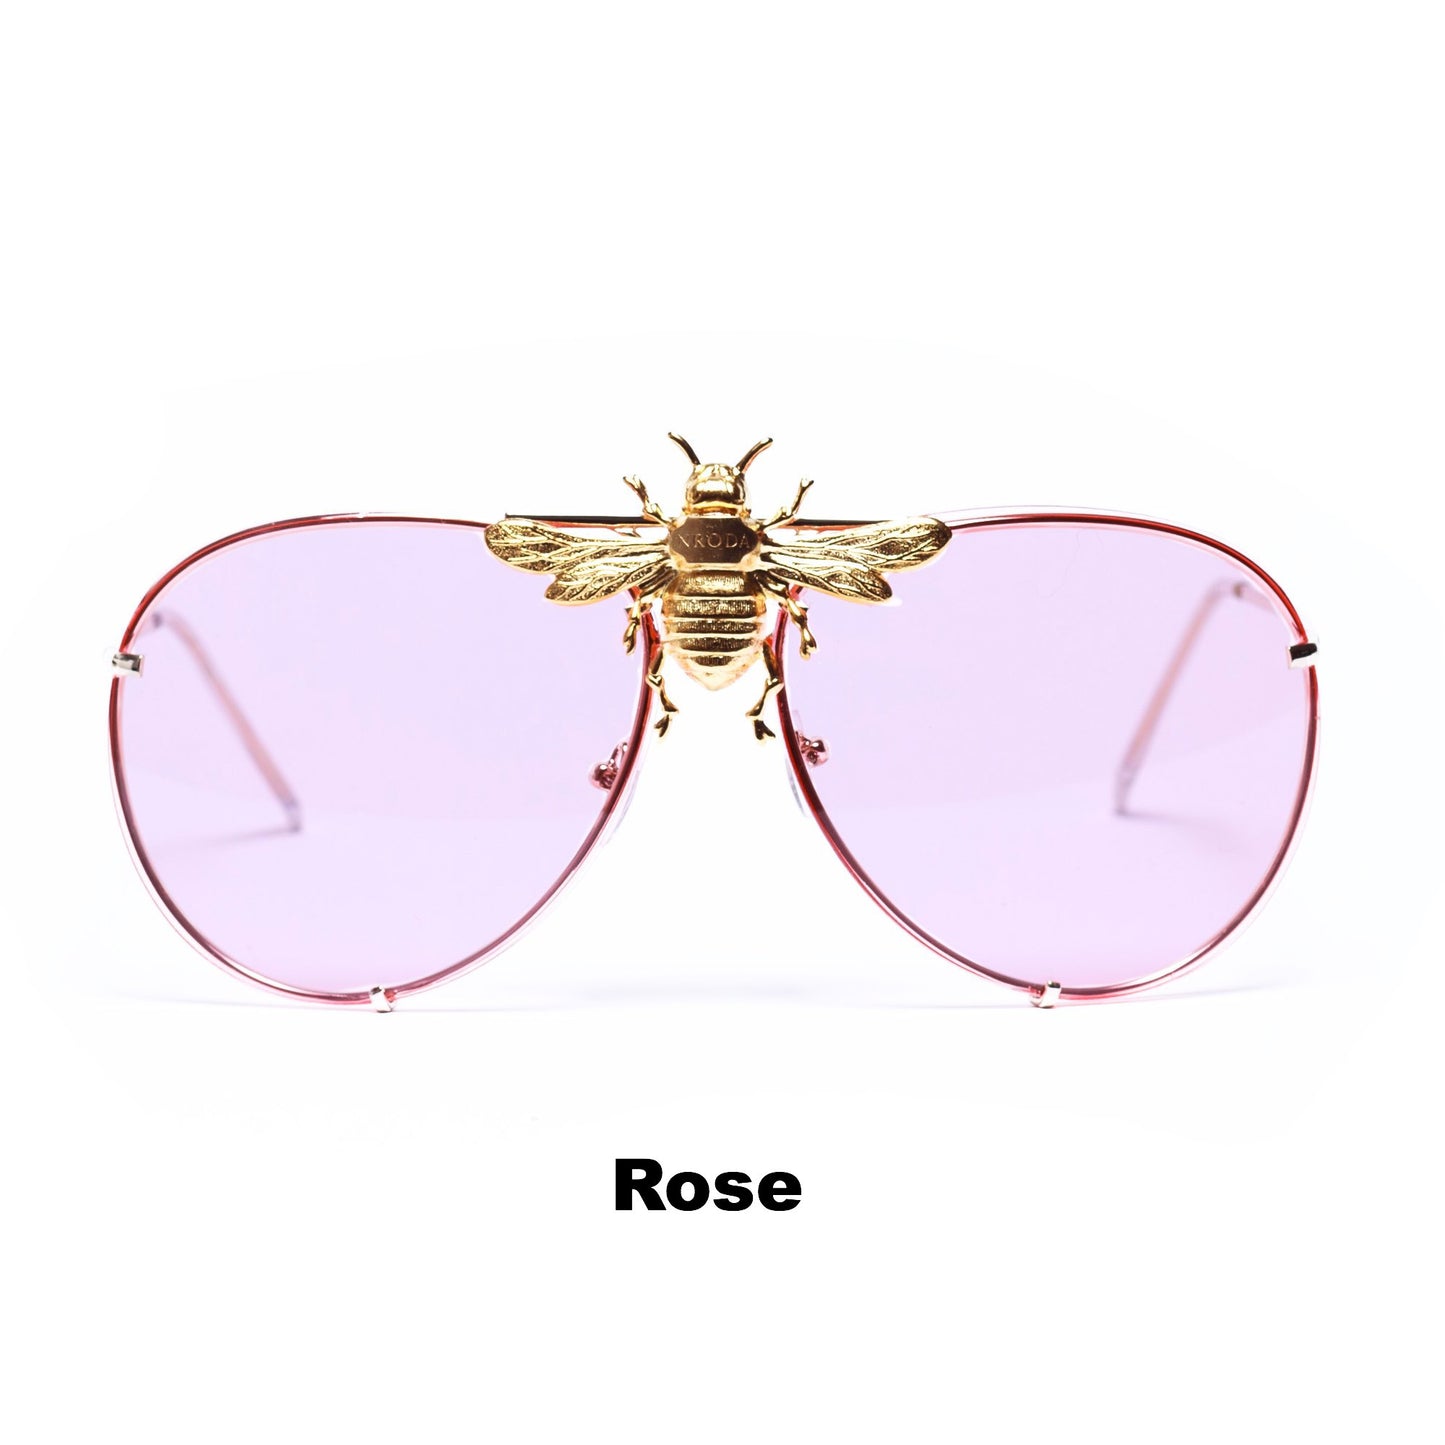 I’ll Be Rich Forever Bee Sunglasses: Primary Edition Rose pink SUNNIES + OPTICS Sunglasses Collection- NRODA